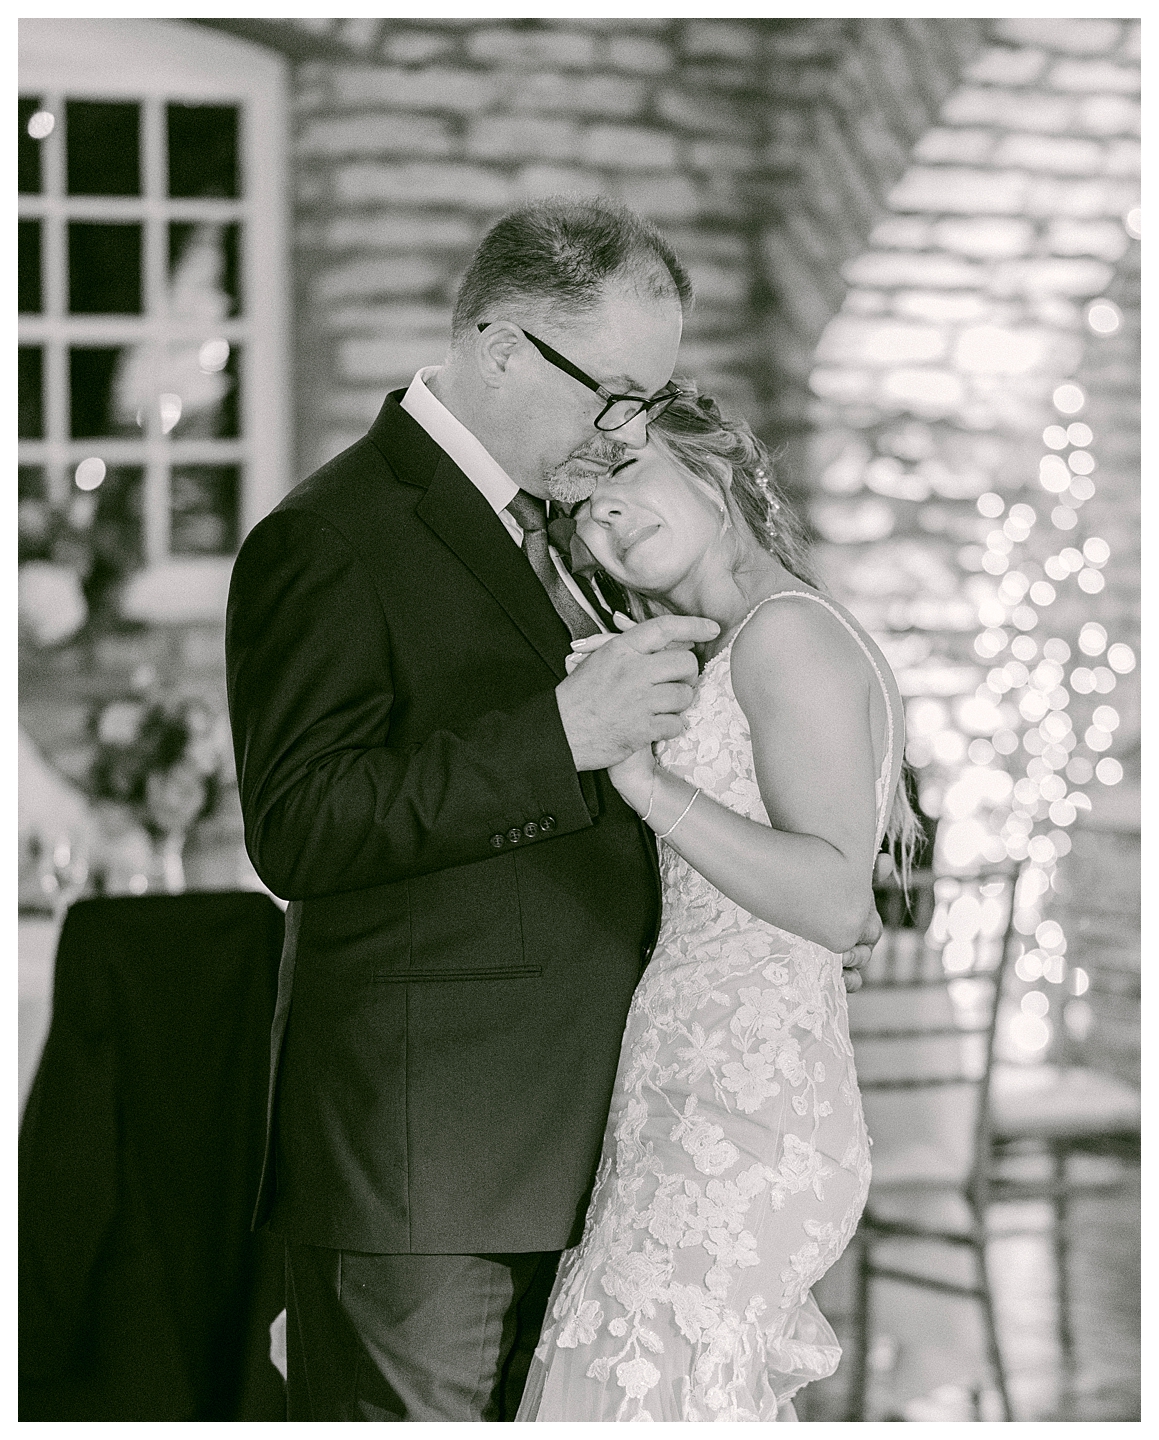 The bride dances with her dad at a Mayowood Stone Barn Wedding. Photo by Kayla Lee.